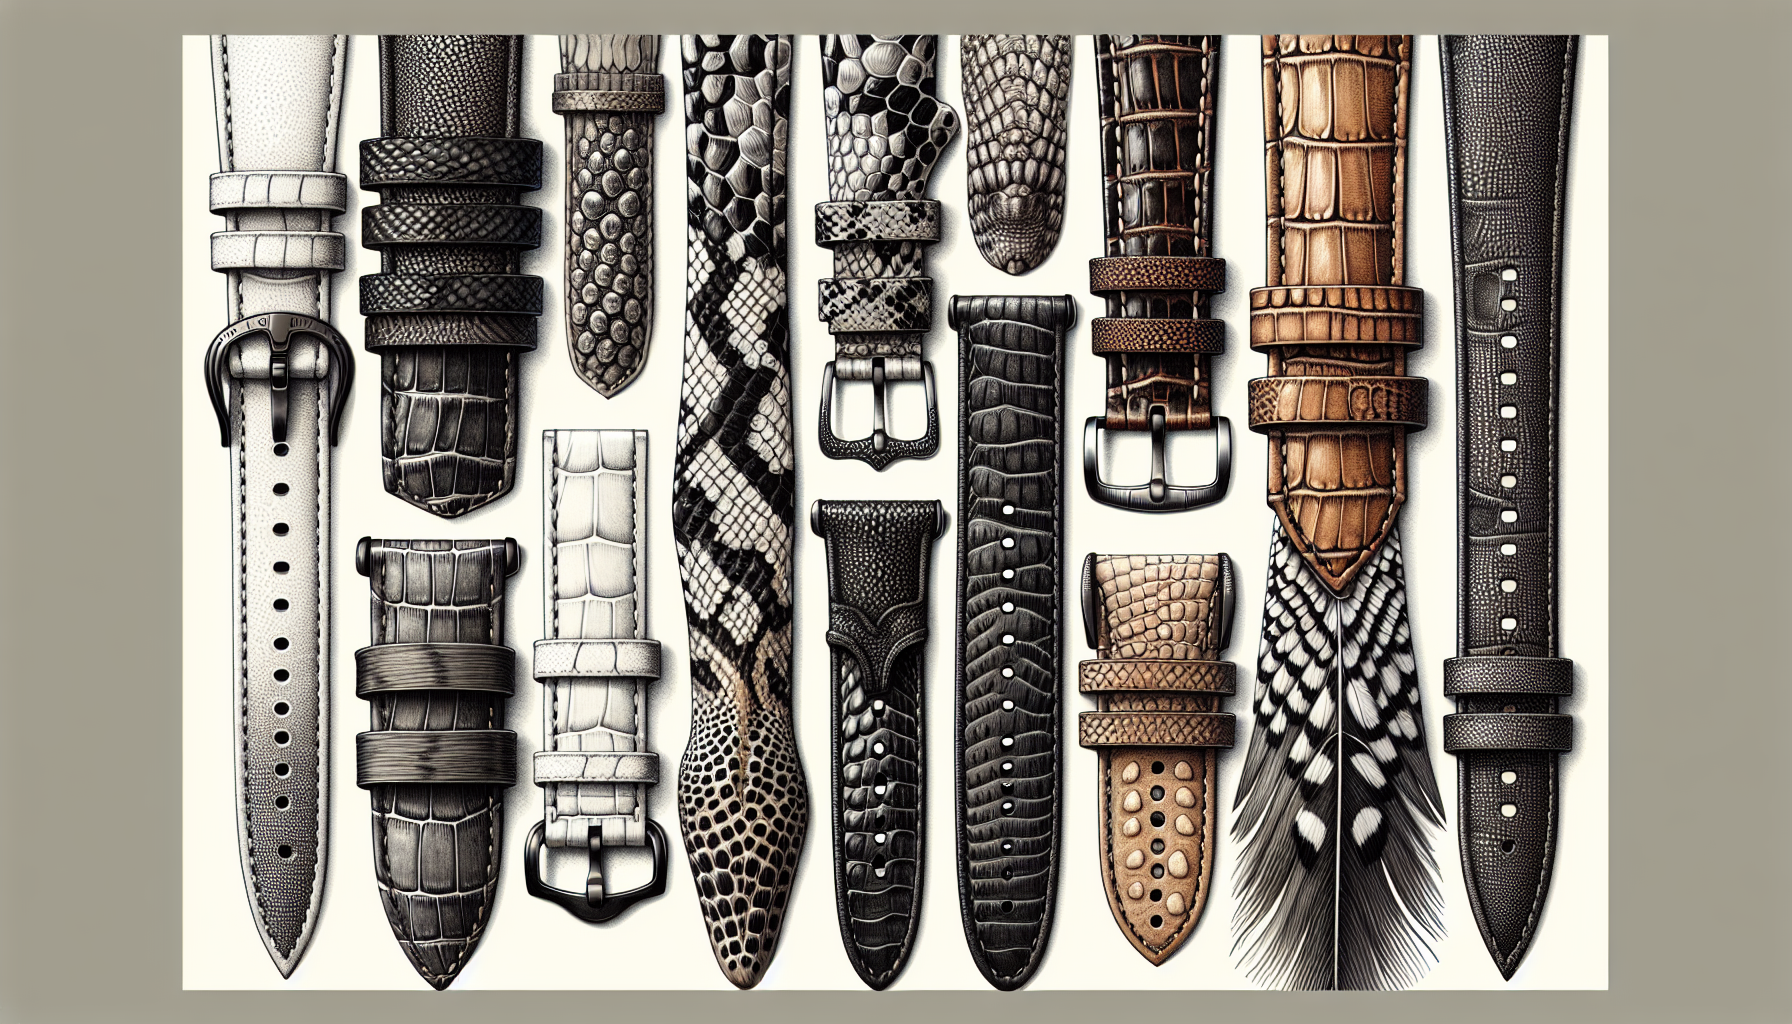 Variety of leather watch bands including calfskin, alligator, crocodile, ostrich, snake, and buffalo